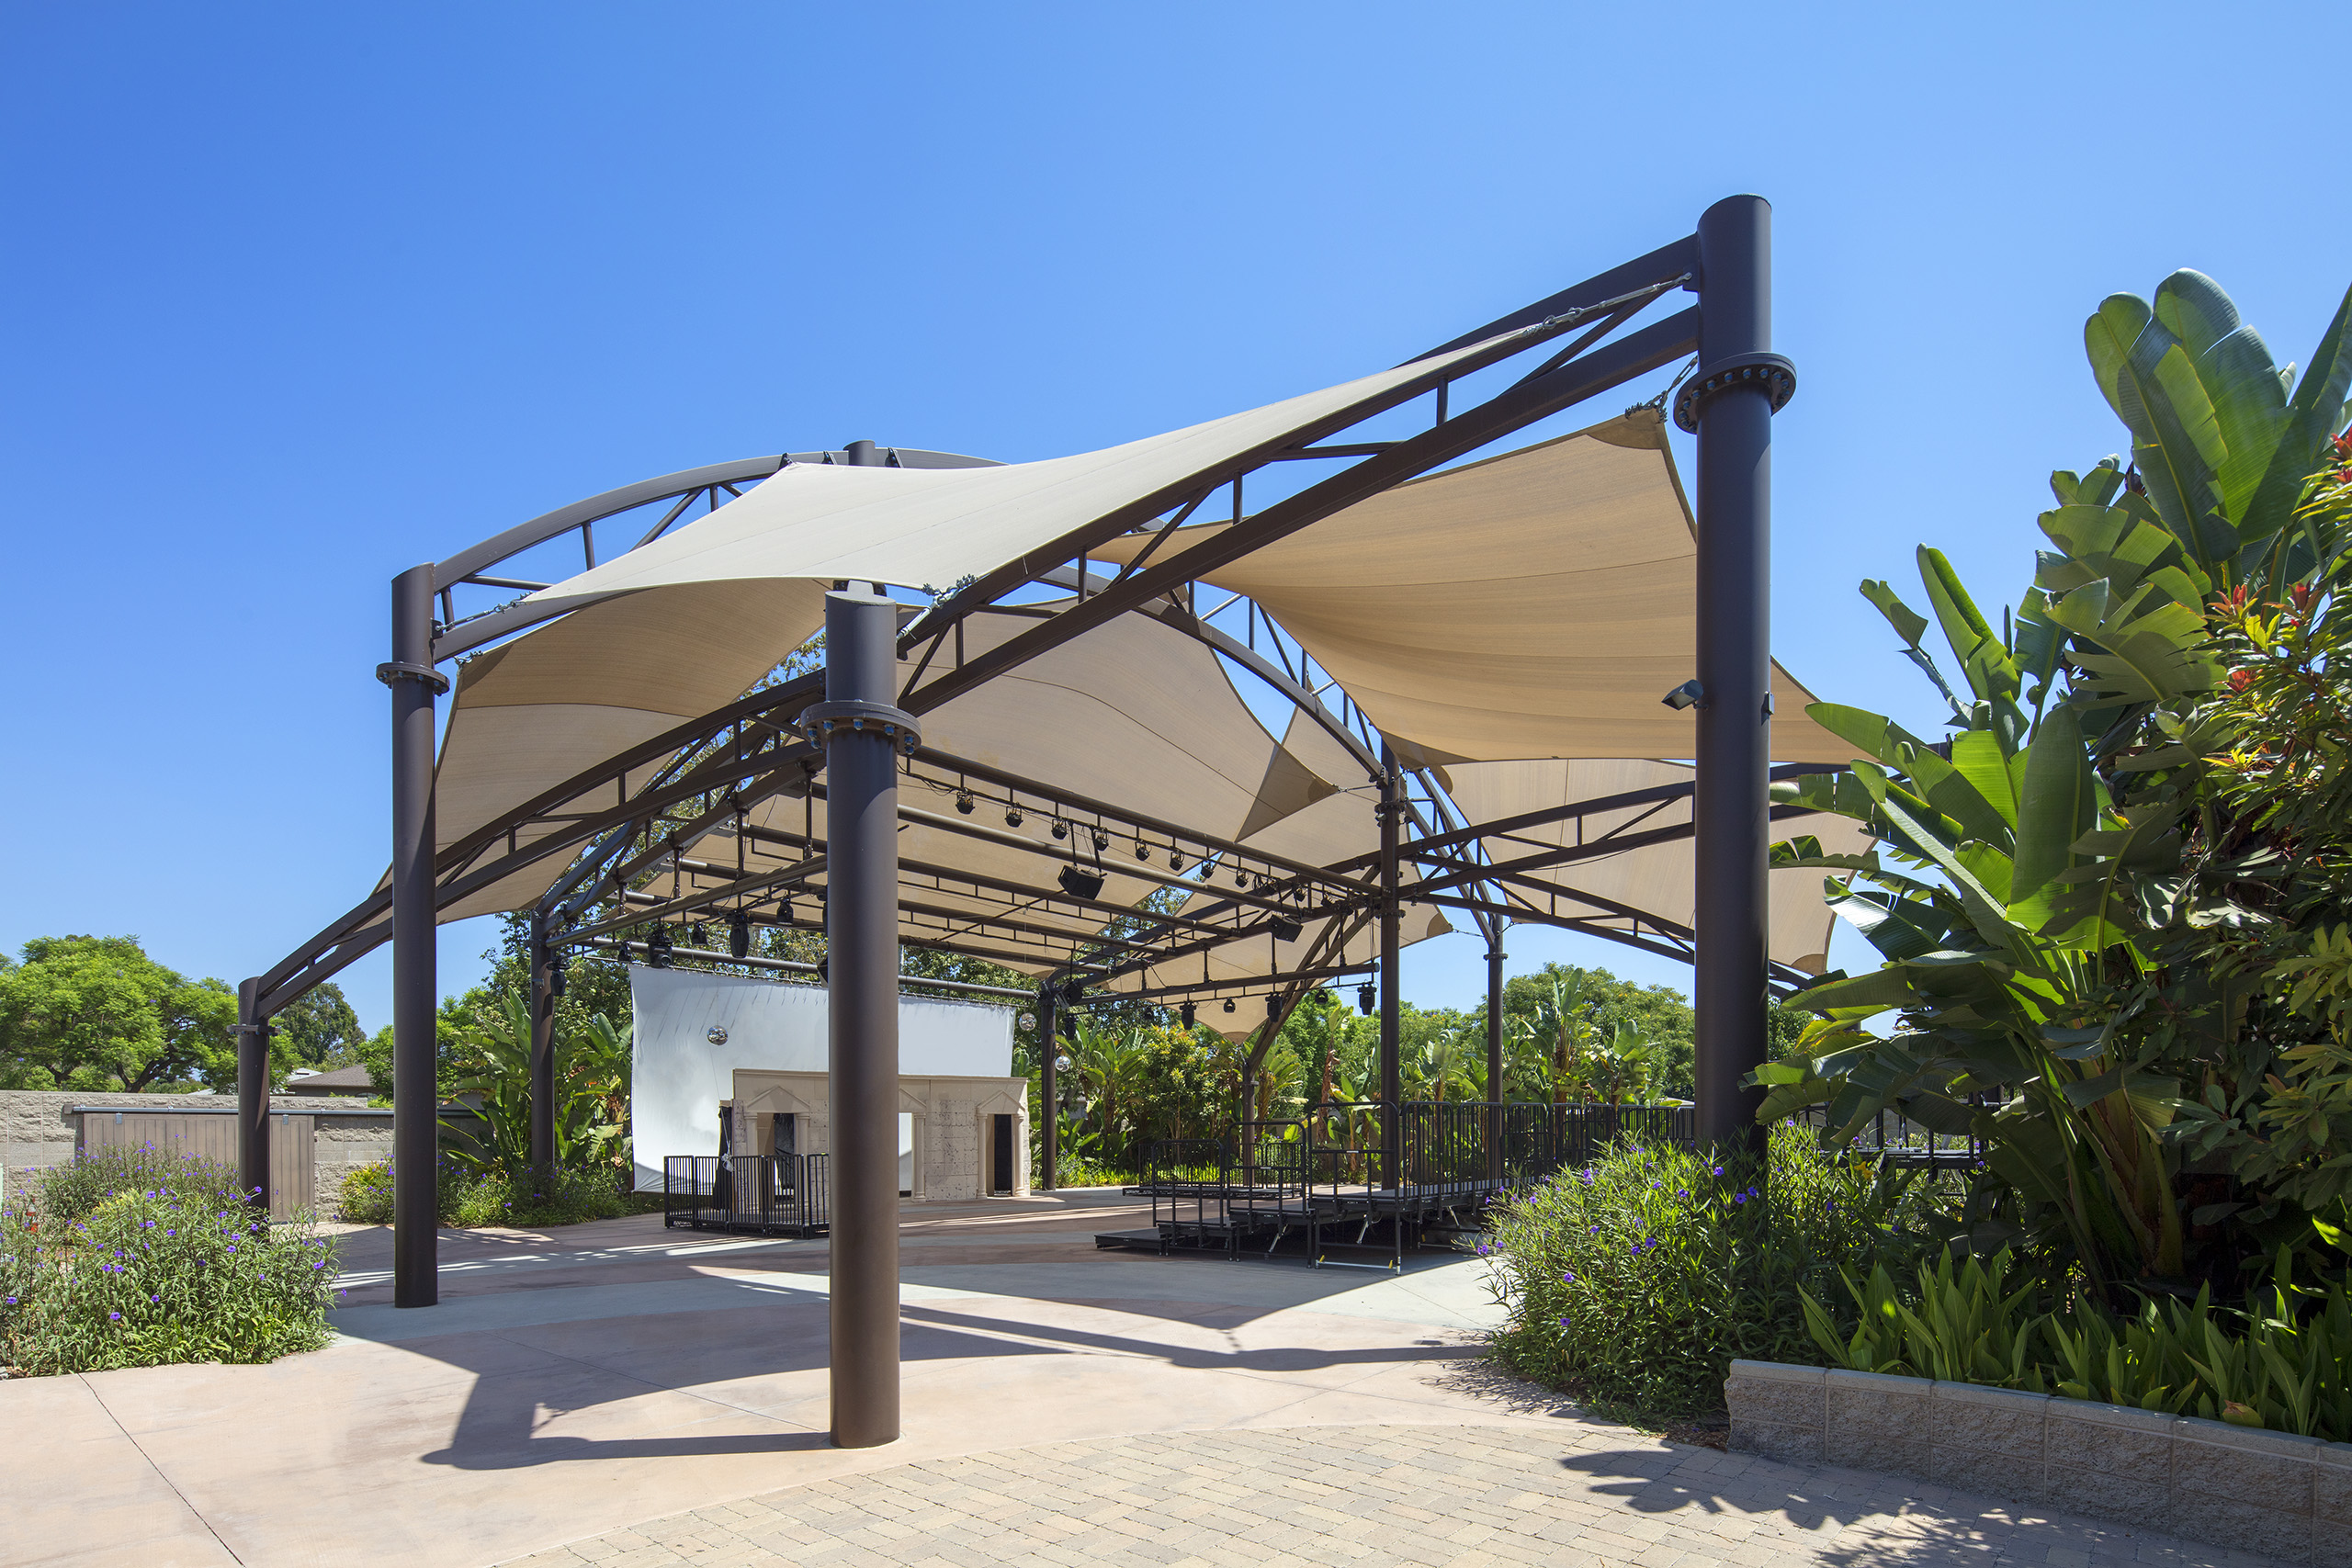 Protect outdoor guests at events with a shade structure